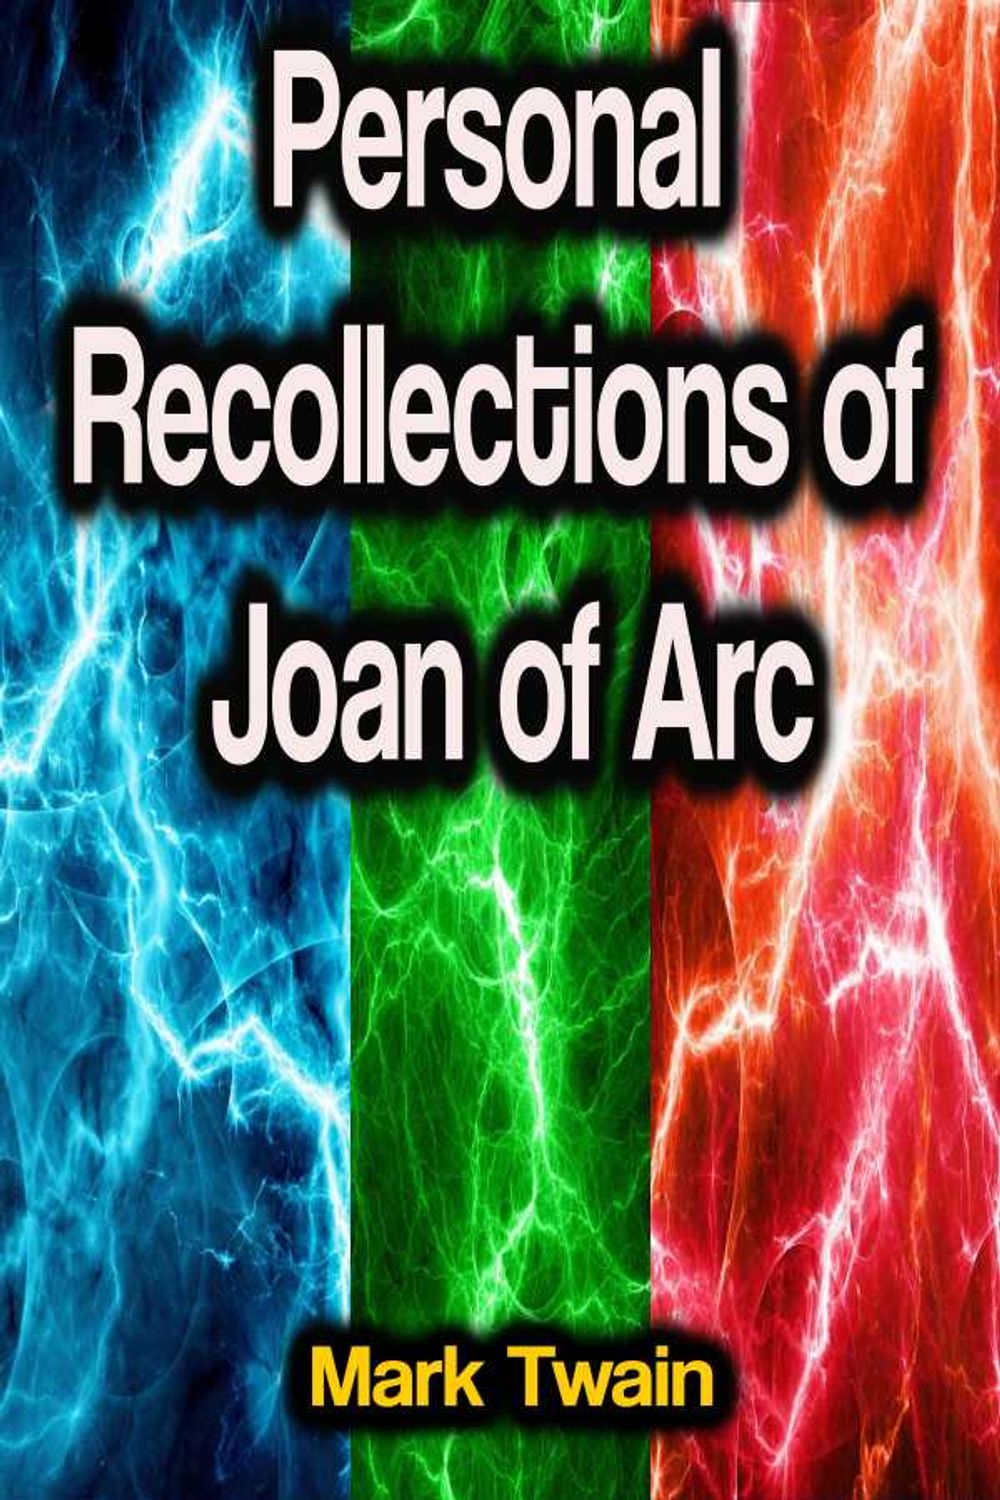 bw-personal-recollections-of-joan-of-arc-phoemixx-classics-ebooks-9783986775902